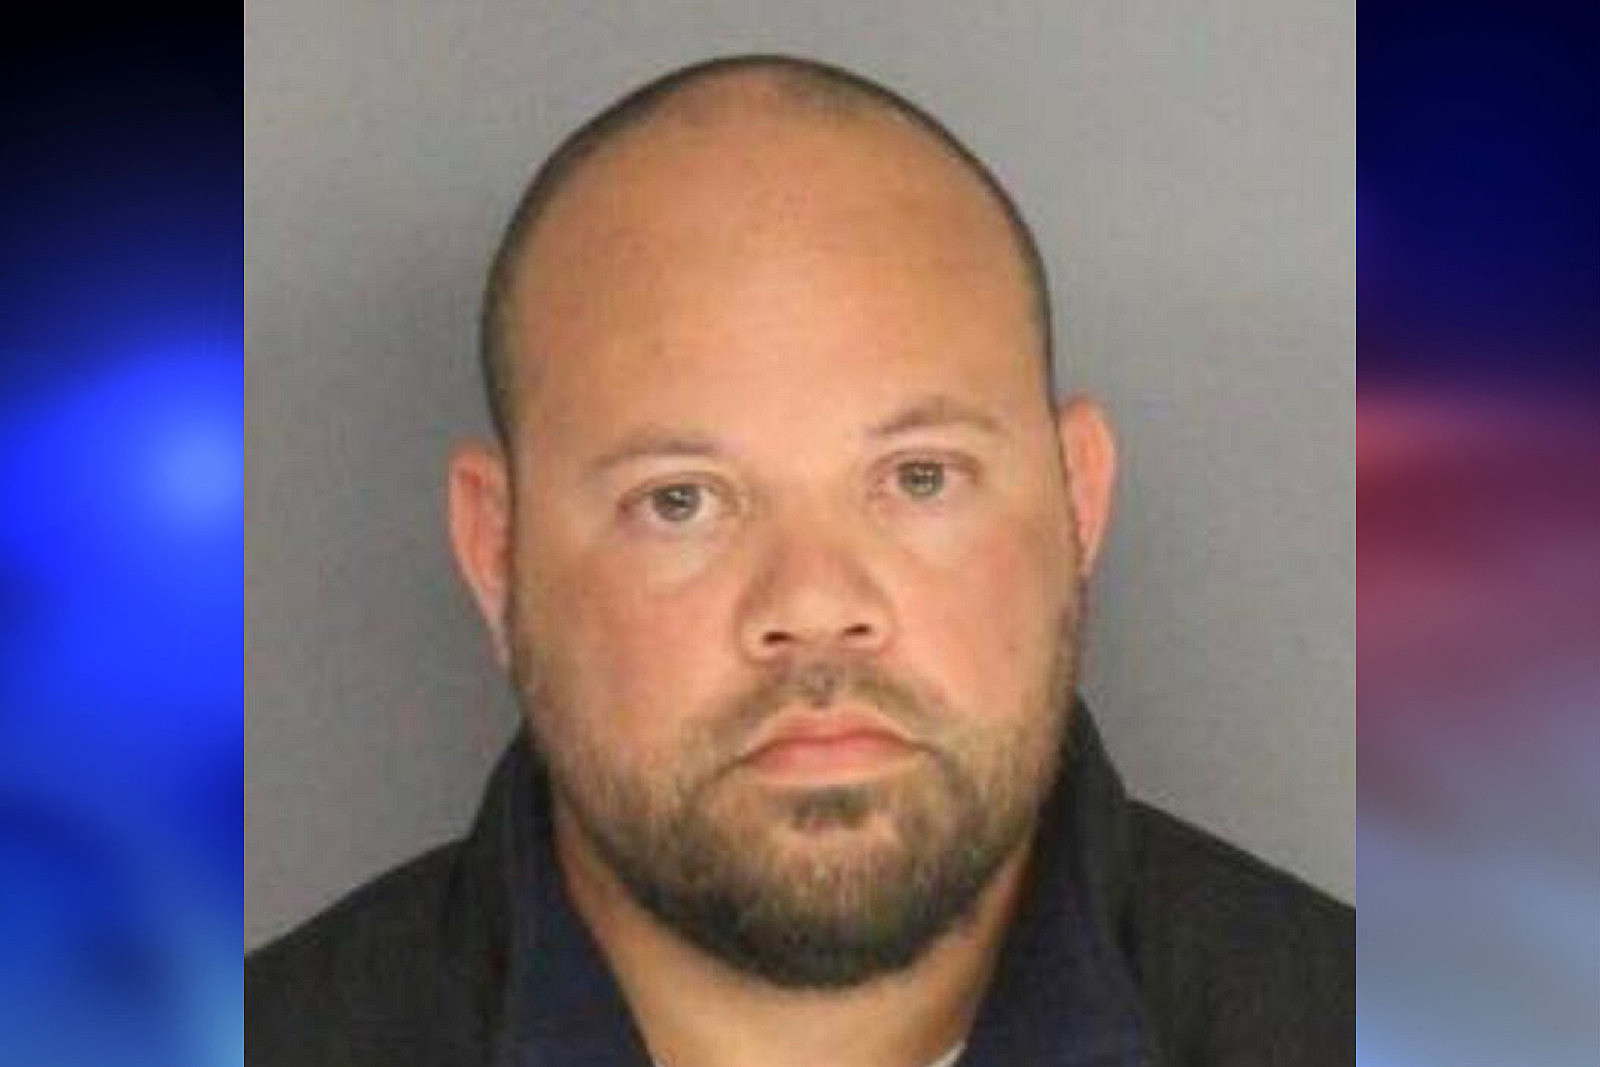 Gonzalez Porn - Essex County, NJ jail officer accused of sharing child porn